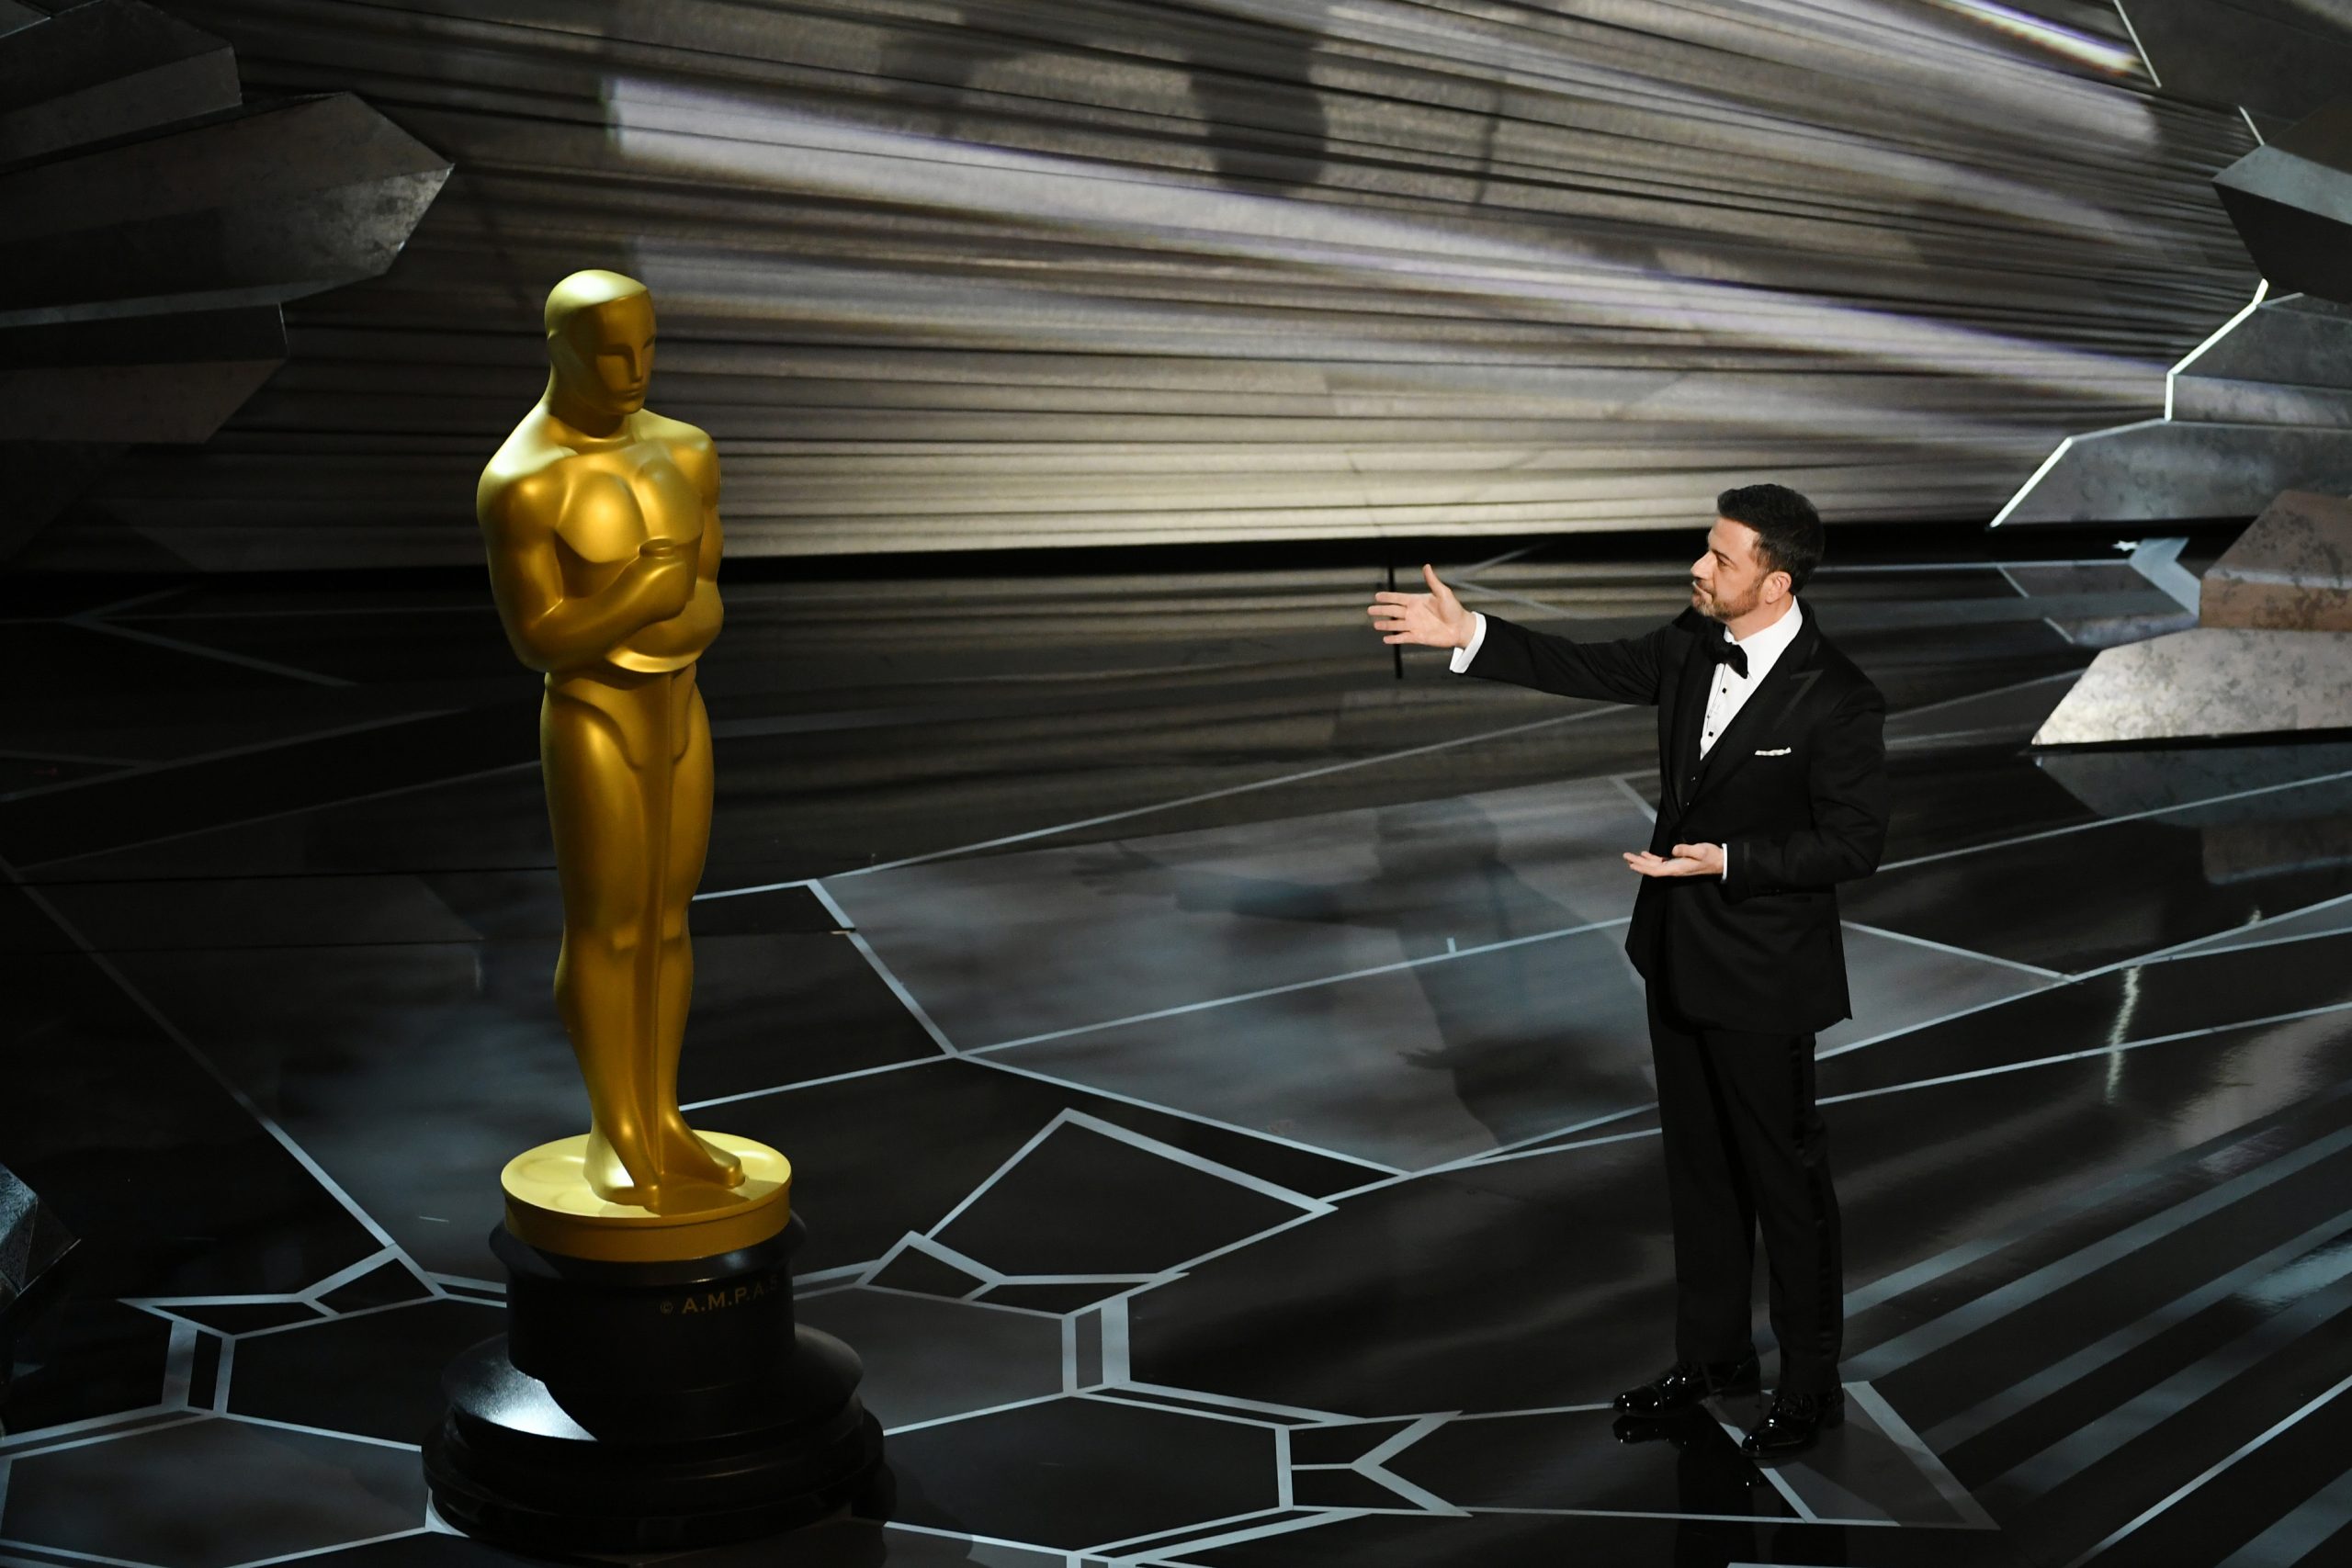 HOLLYWOOD, CA - MARCH 04: Host Jimmy Kimmel speaks onstage during the 90th Annual Academy Awards at the Dolby Theatre at Hollywood & Highland Center on March 4, 2018 in Hollywood, California. (Photo by Kevin Winter/Getty Images)